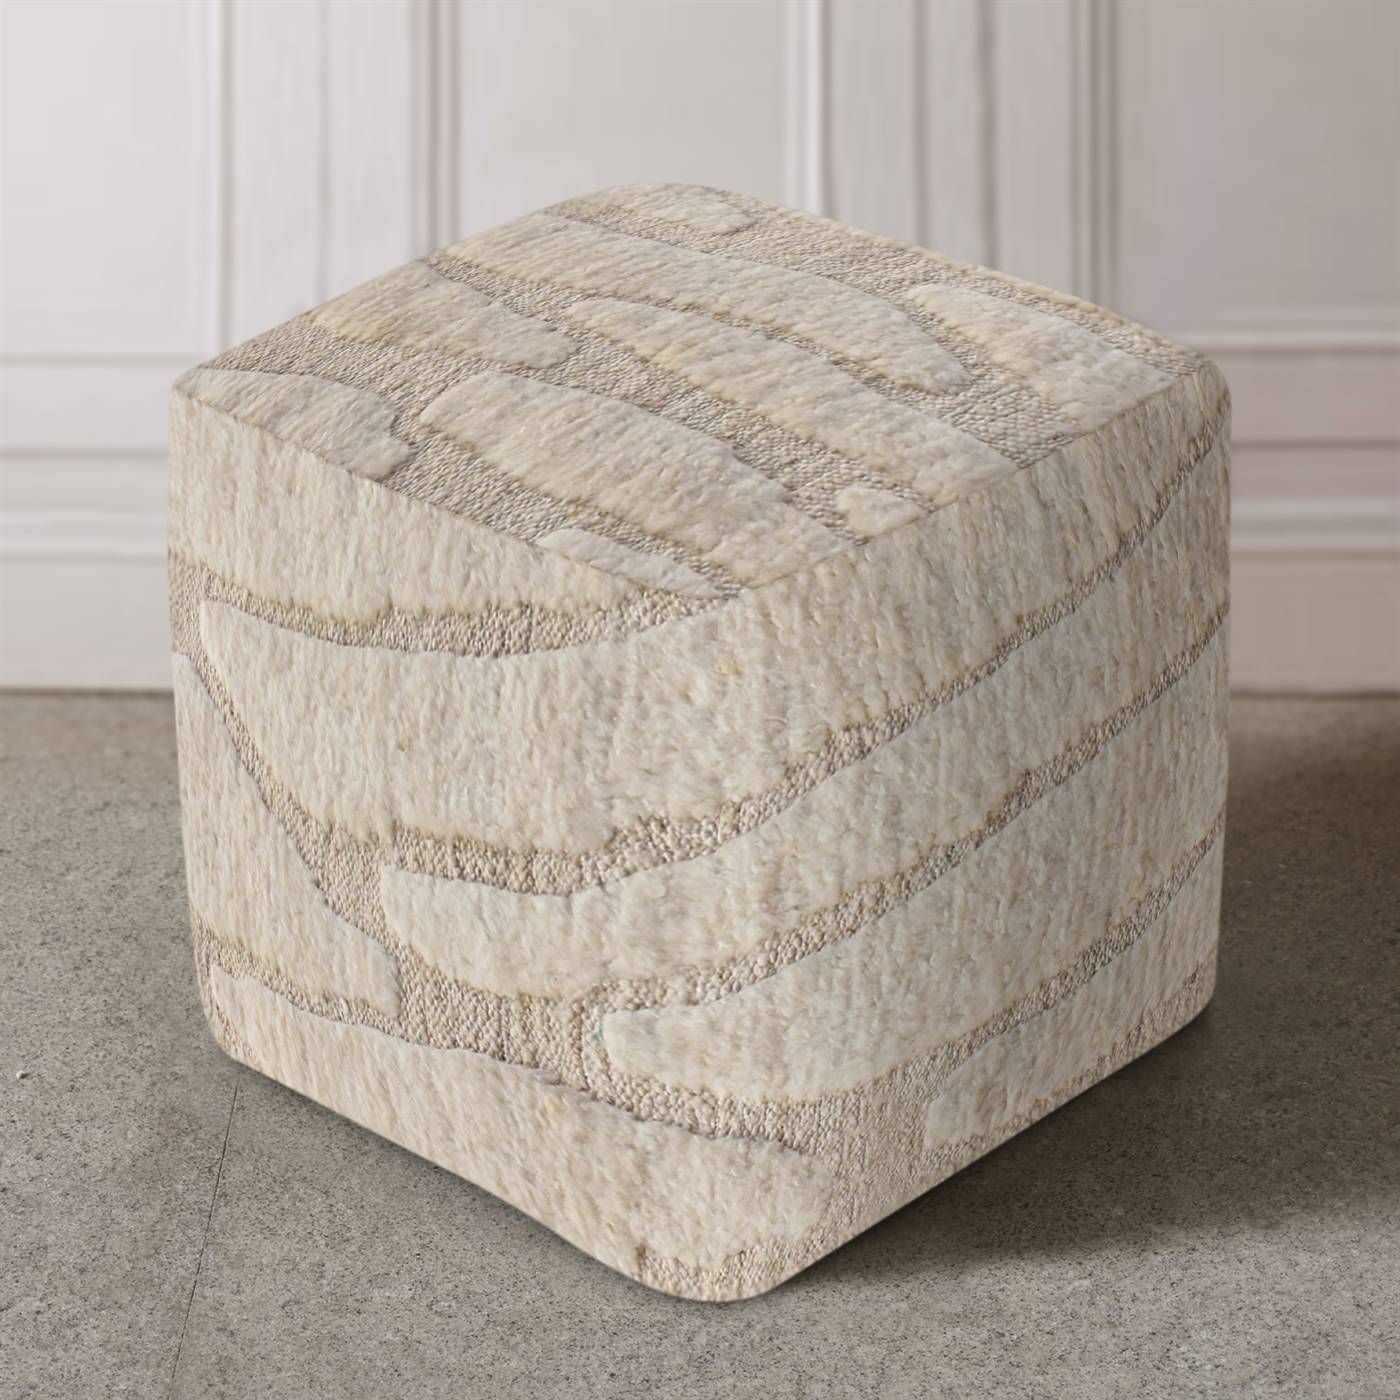 Wrangell Pouf, 40x40x40 cm, Natural White, Wool, Hand Knotted, Handknotted, All Cut